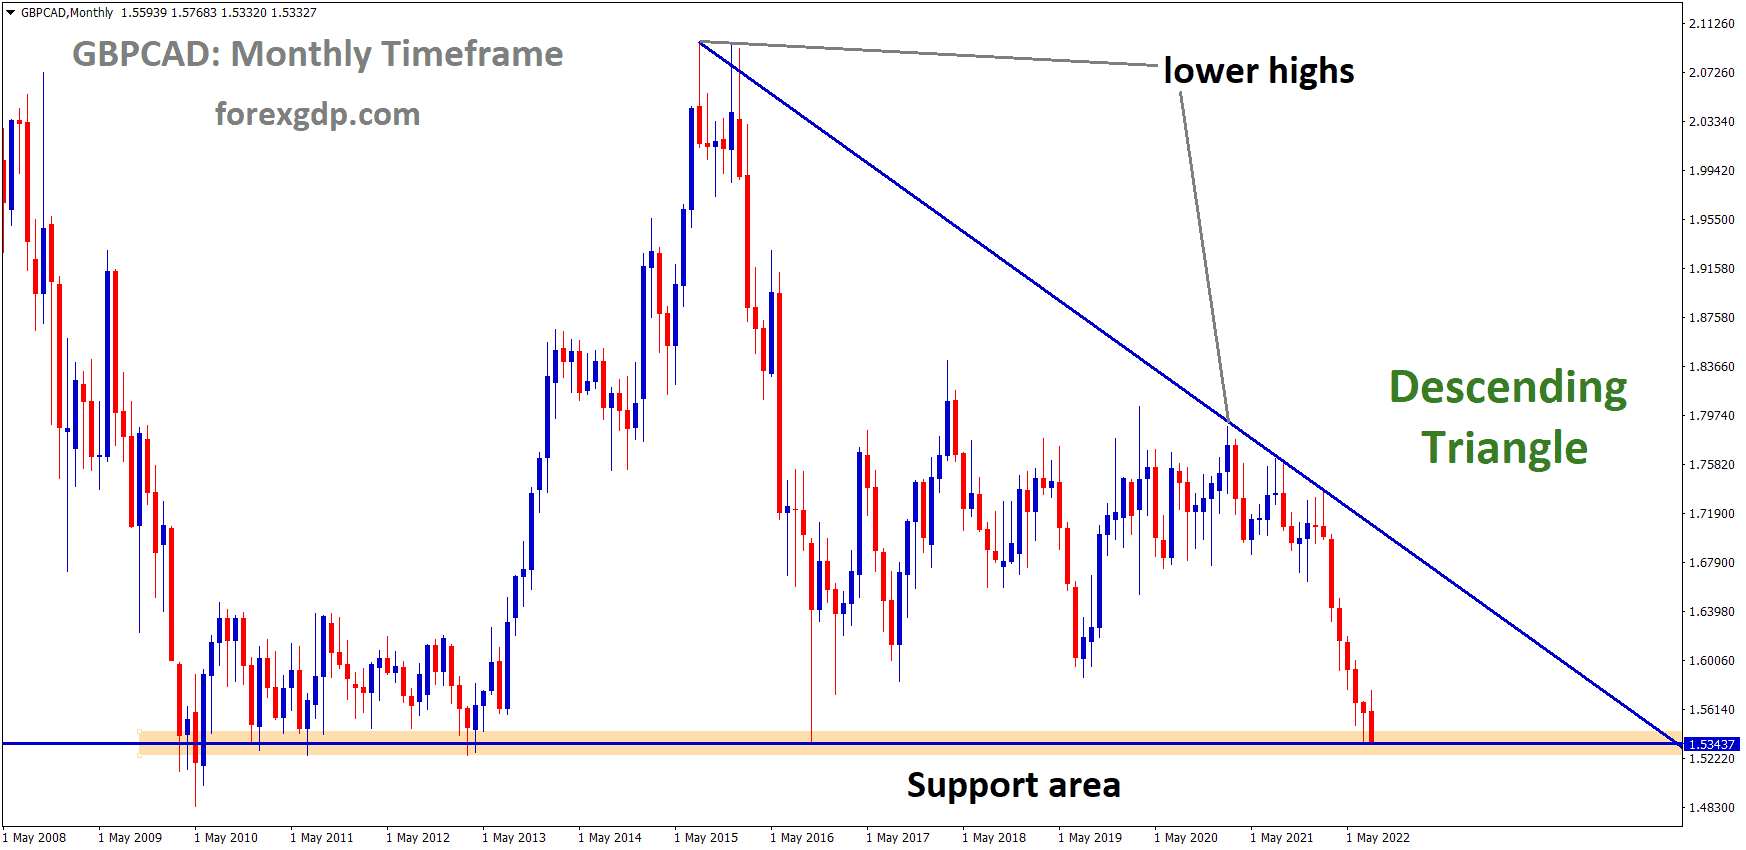 GBPCAD is moving in the Descending triangle pattern and the Market has reached the horizontal support area of the pattern.